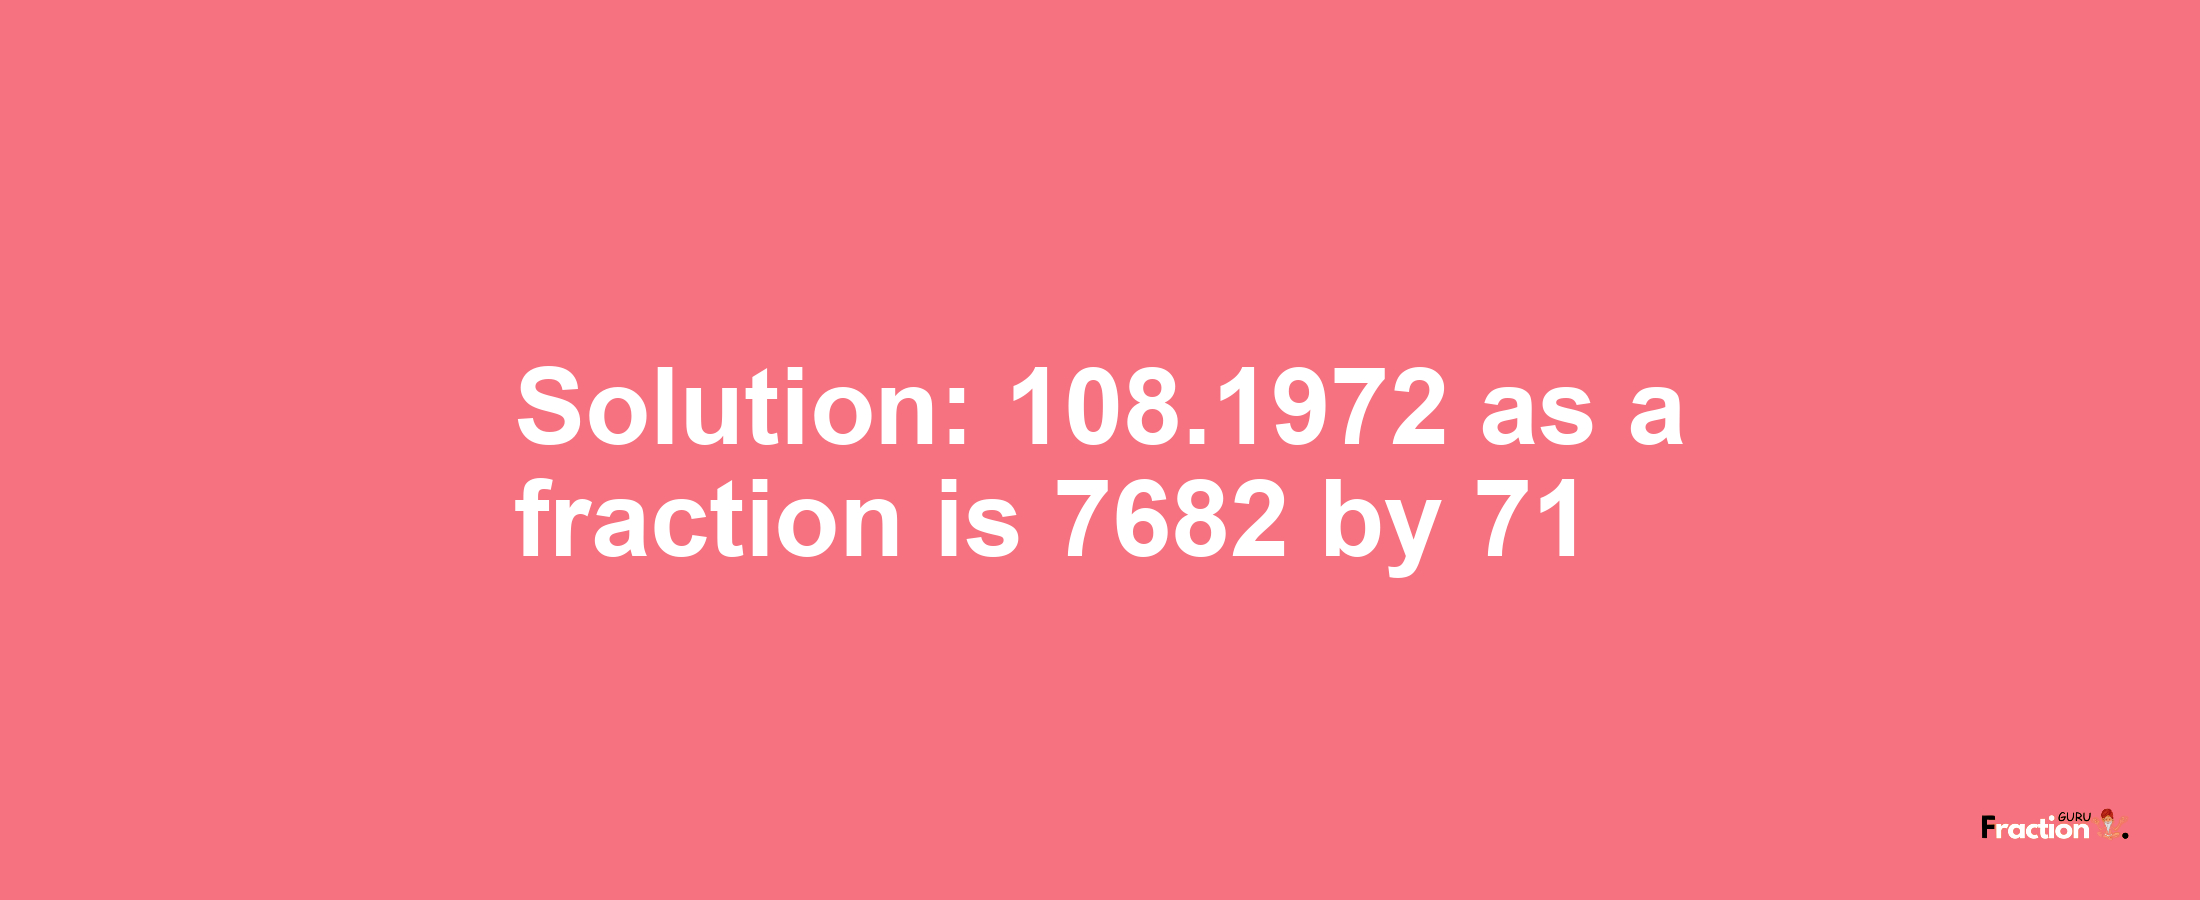 Solution:108.1972 as a fraction is 7682/71